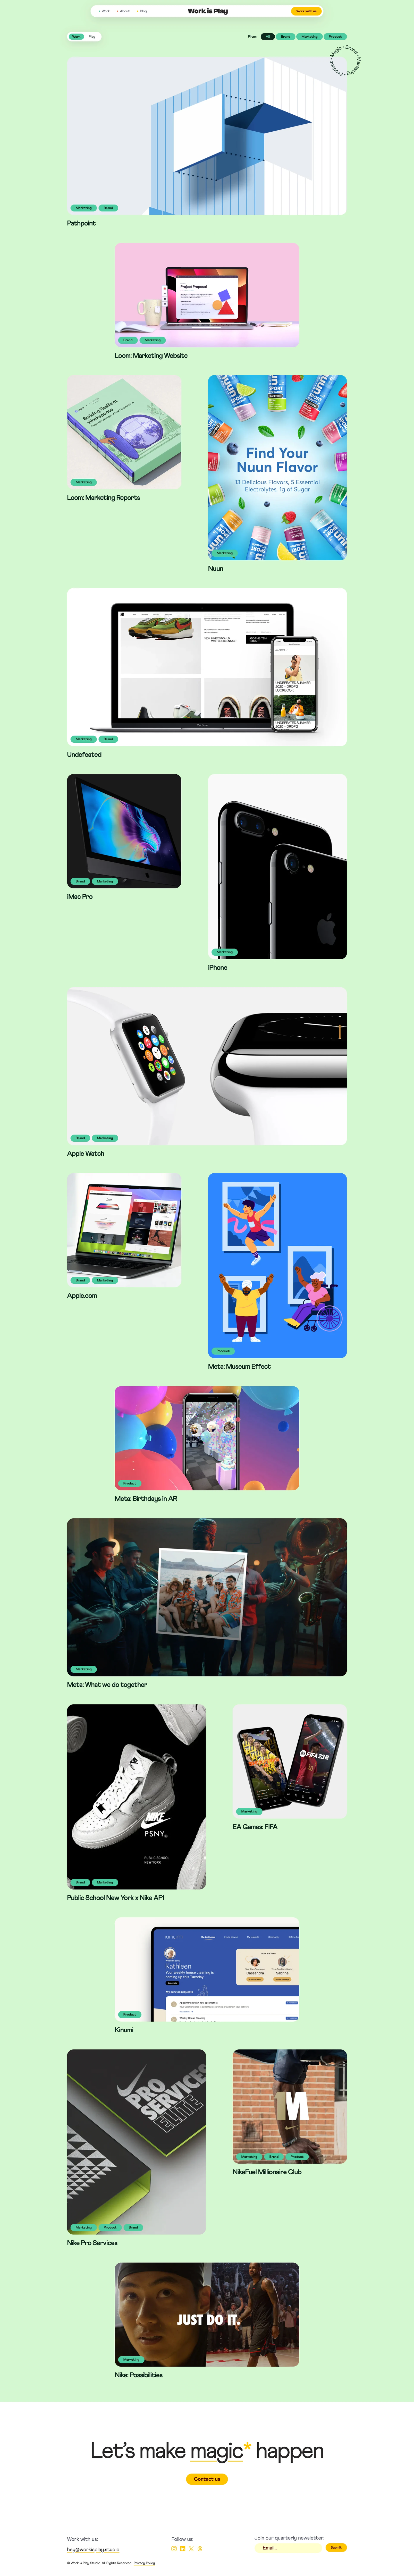 Work is Play Landing Page Example: We’re a fun-size, full-service design studio. Our studio was founded on the belief that original, impactful work is best created with a healthy dose of play.